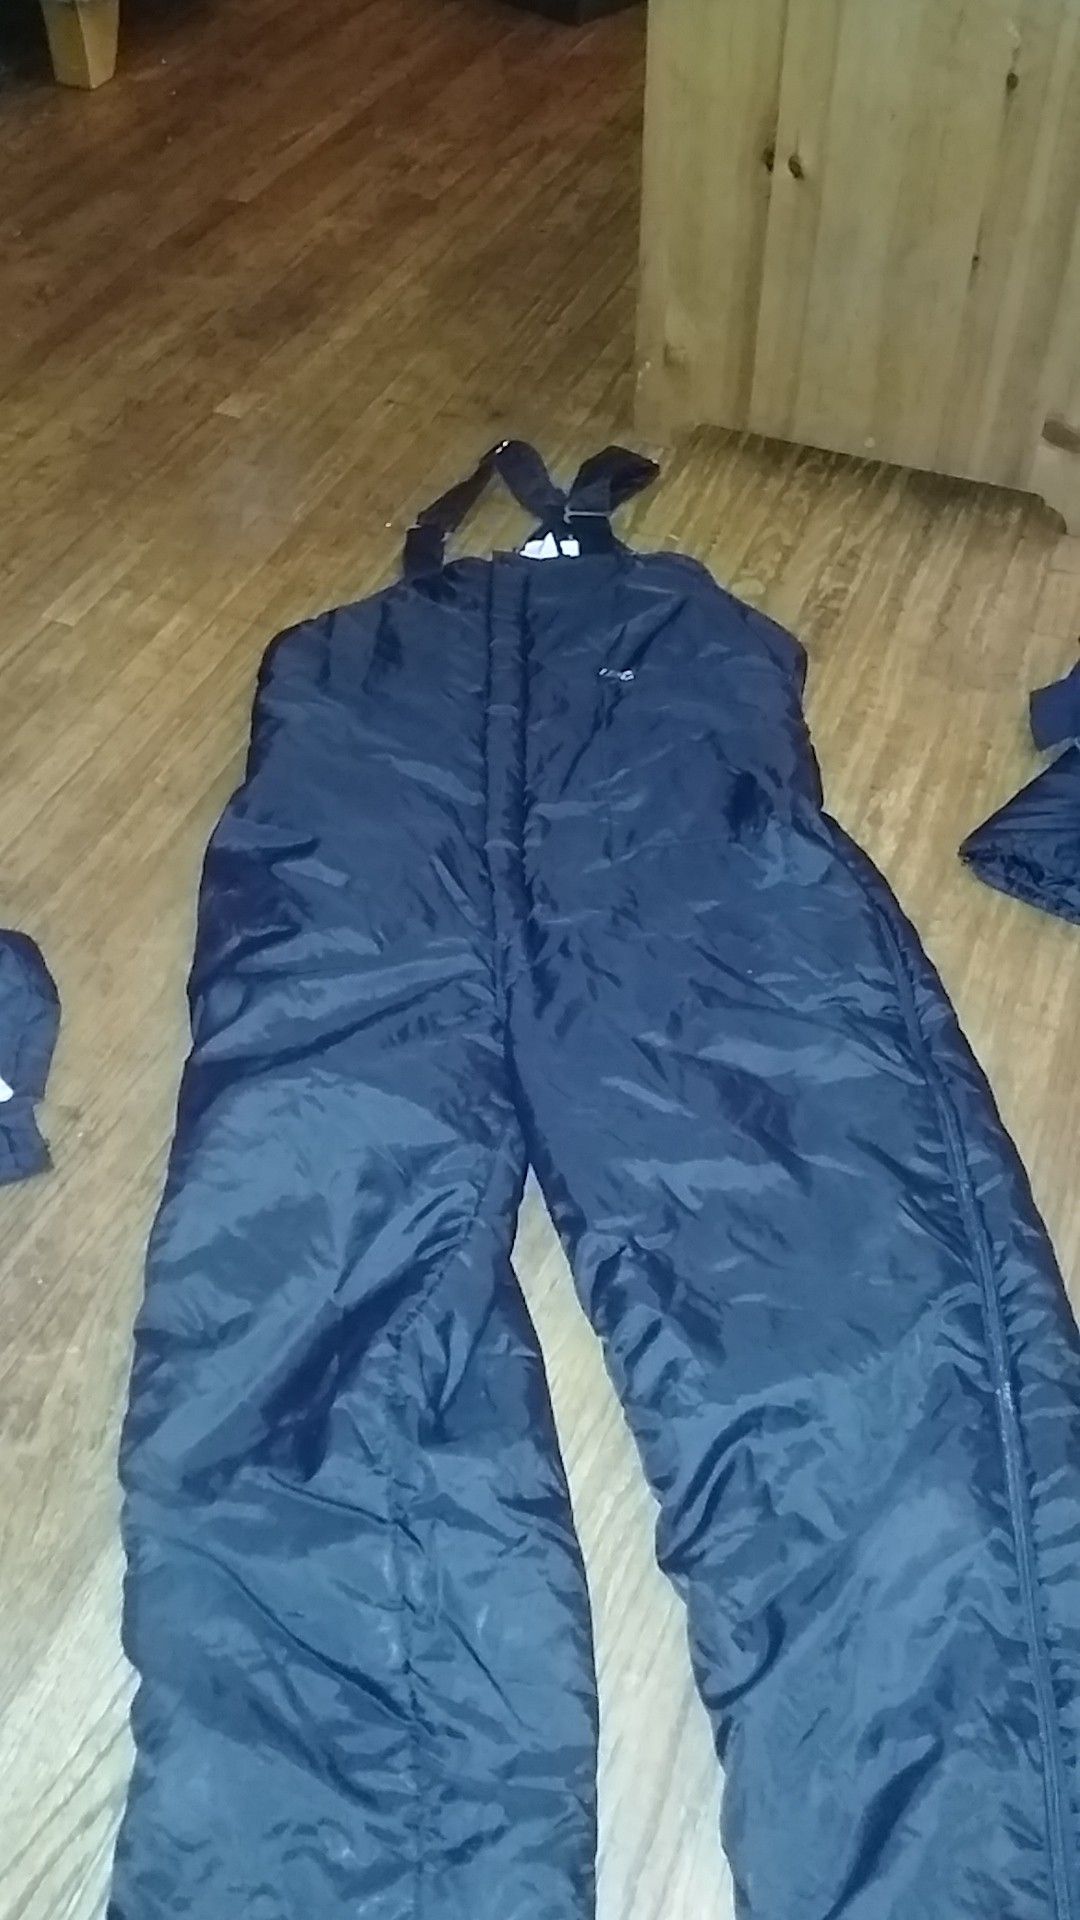 Snow Overall bib size insulated Pruf size 34-36